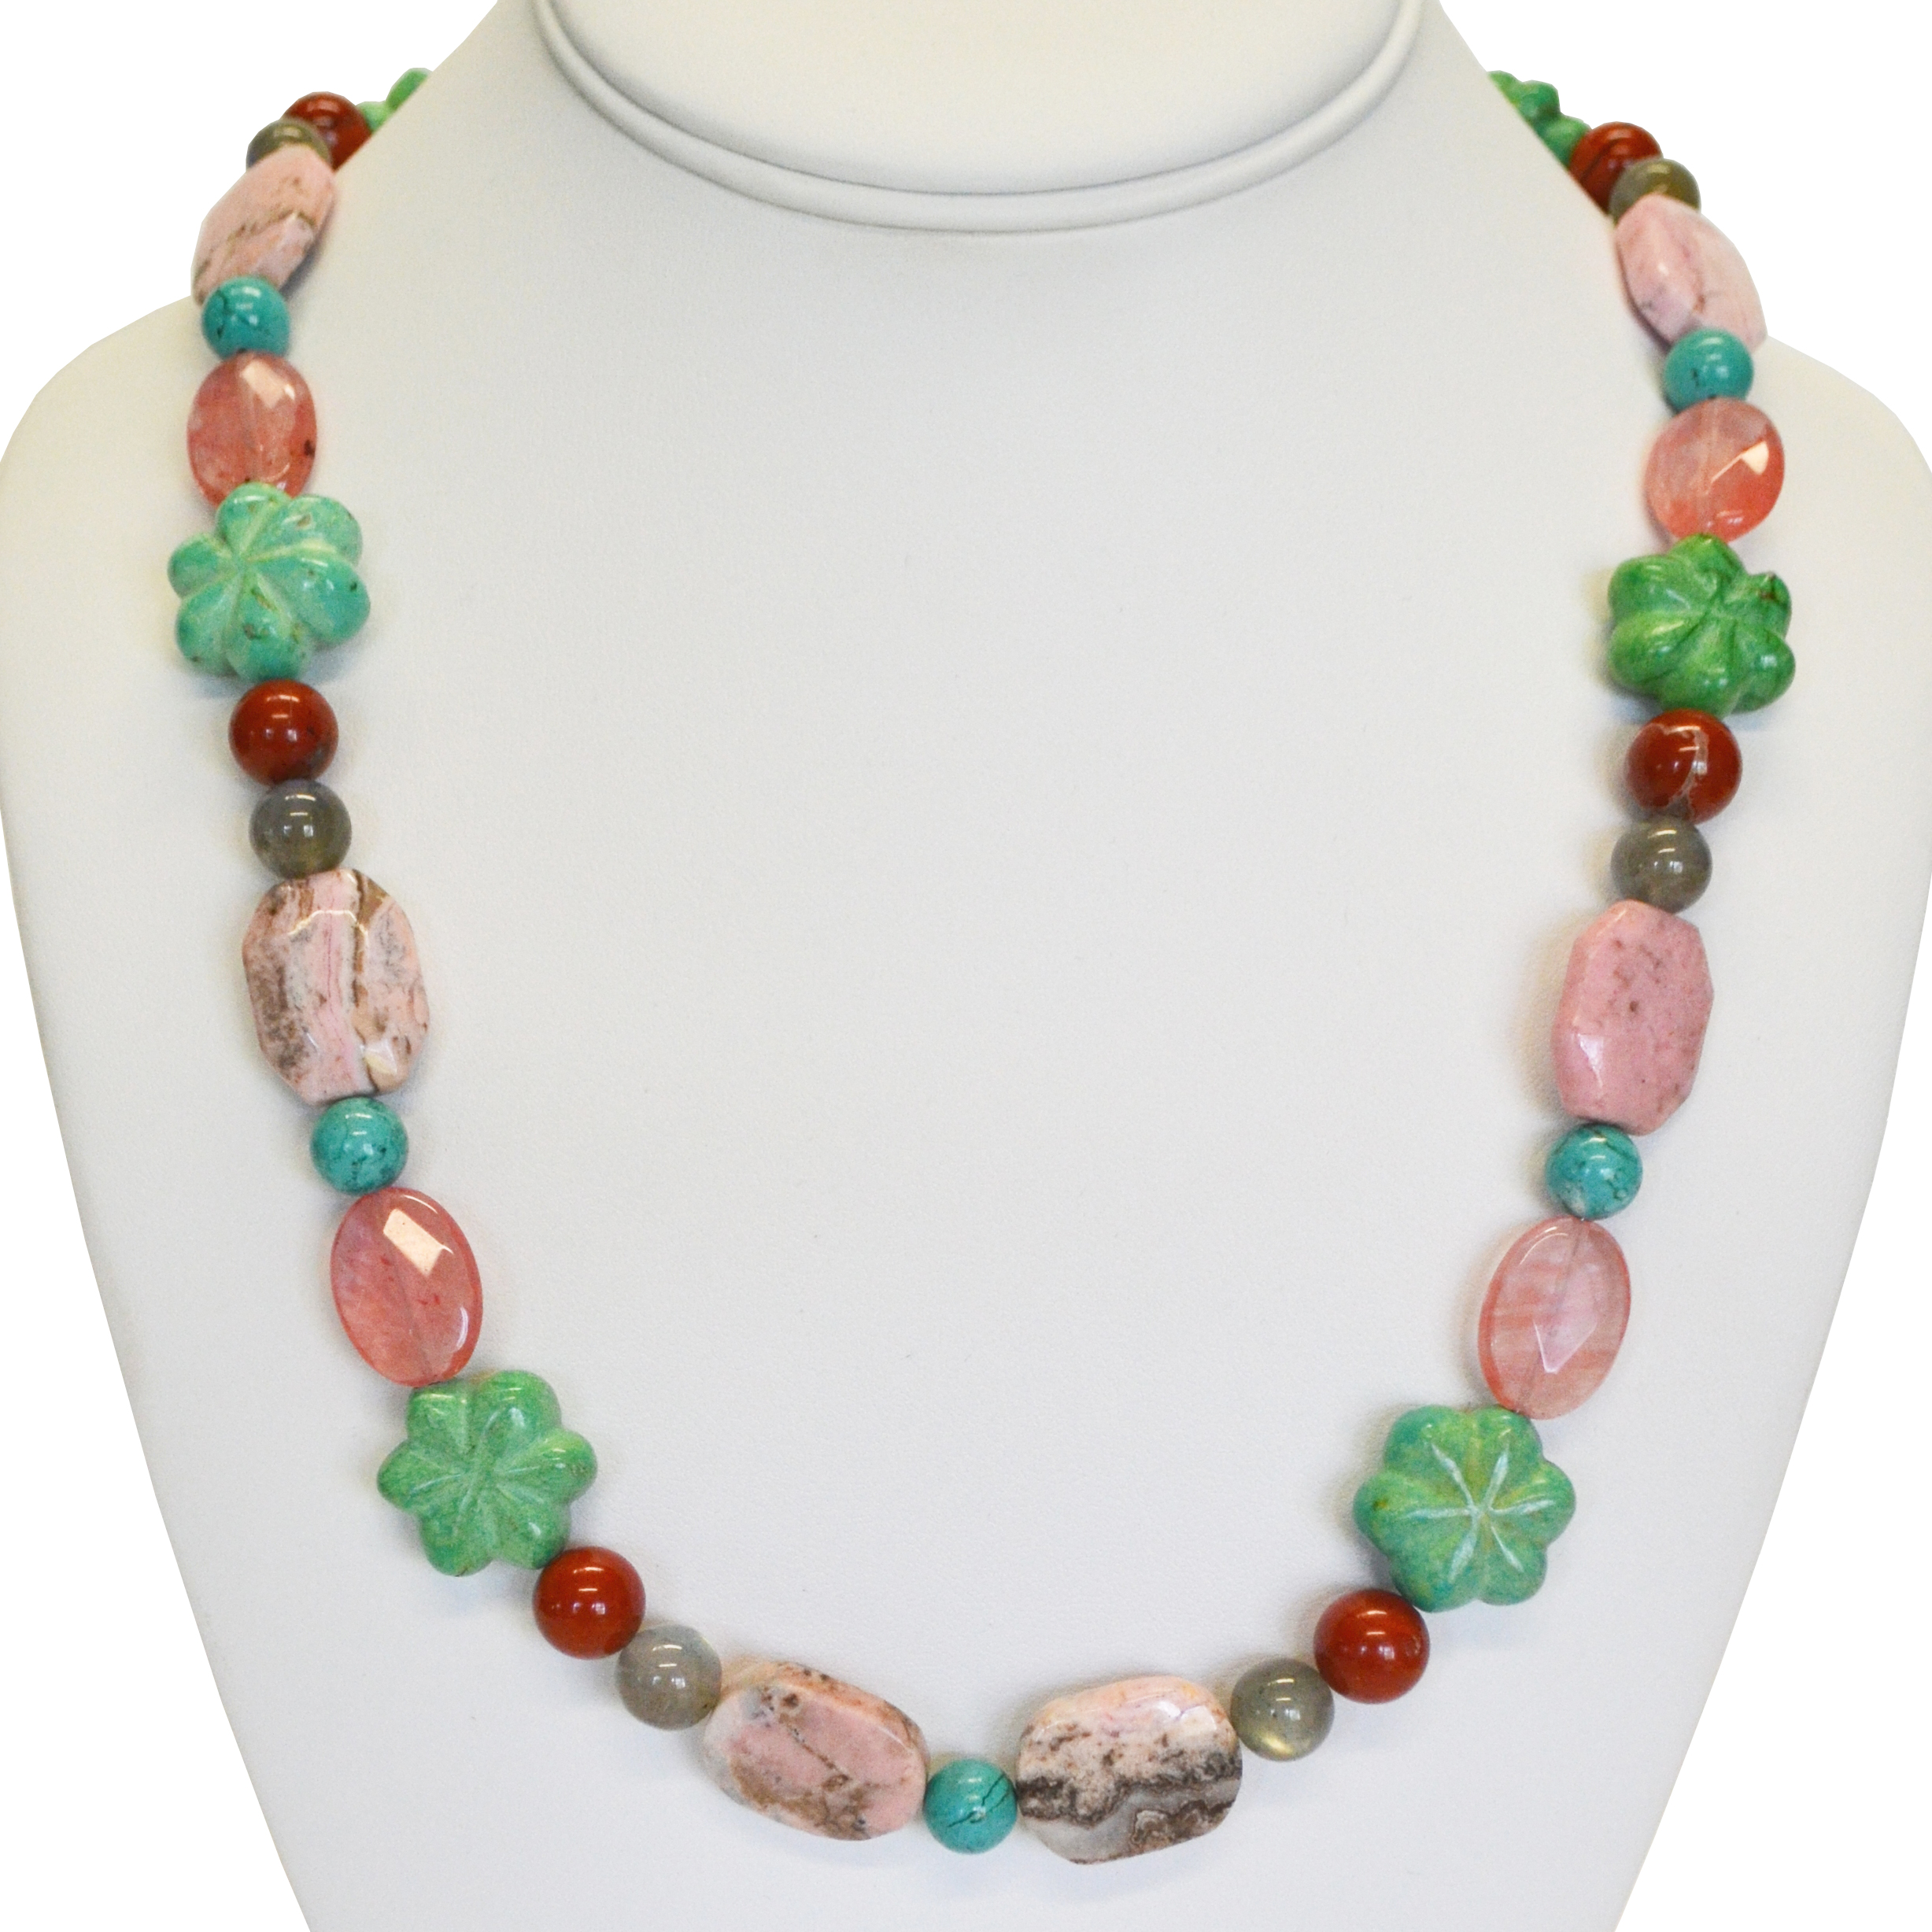 Turquoise flowers necklace by Melissa Berman